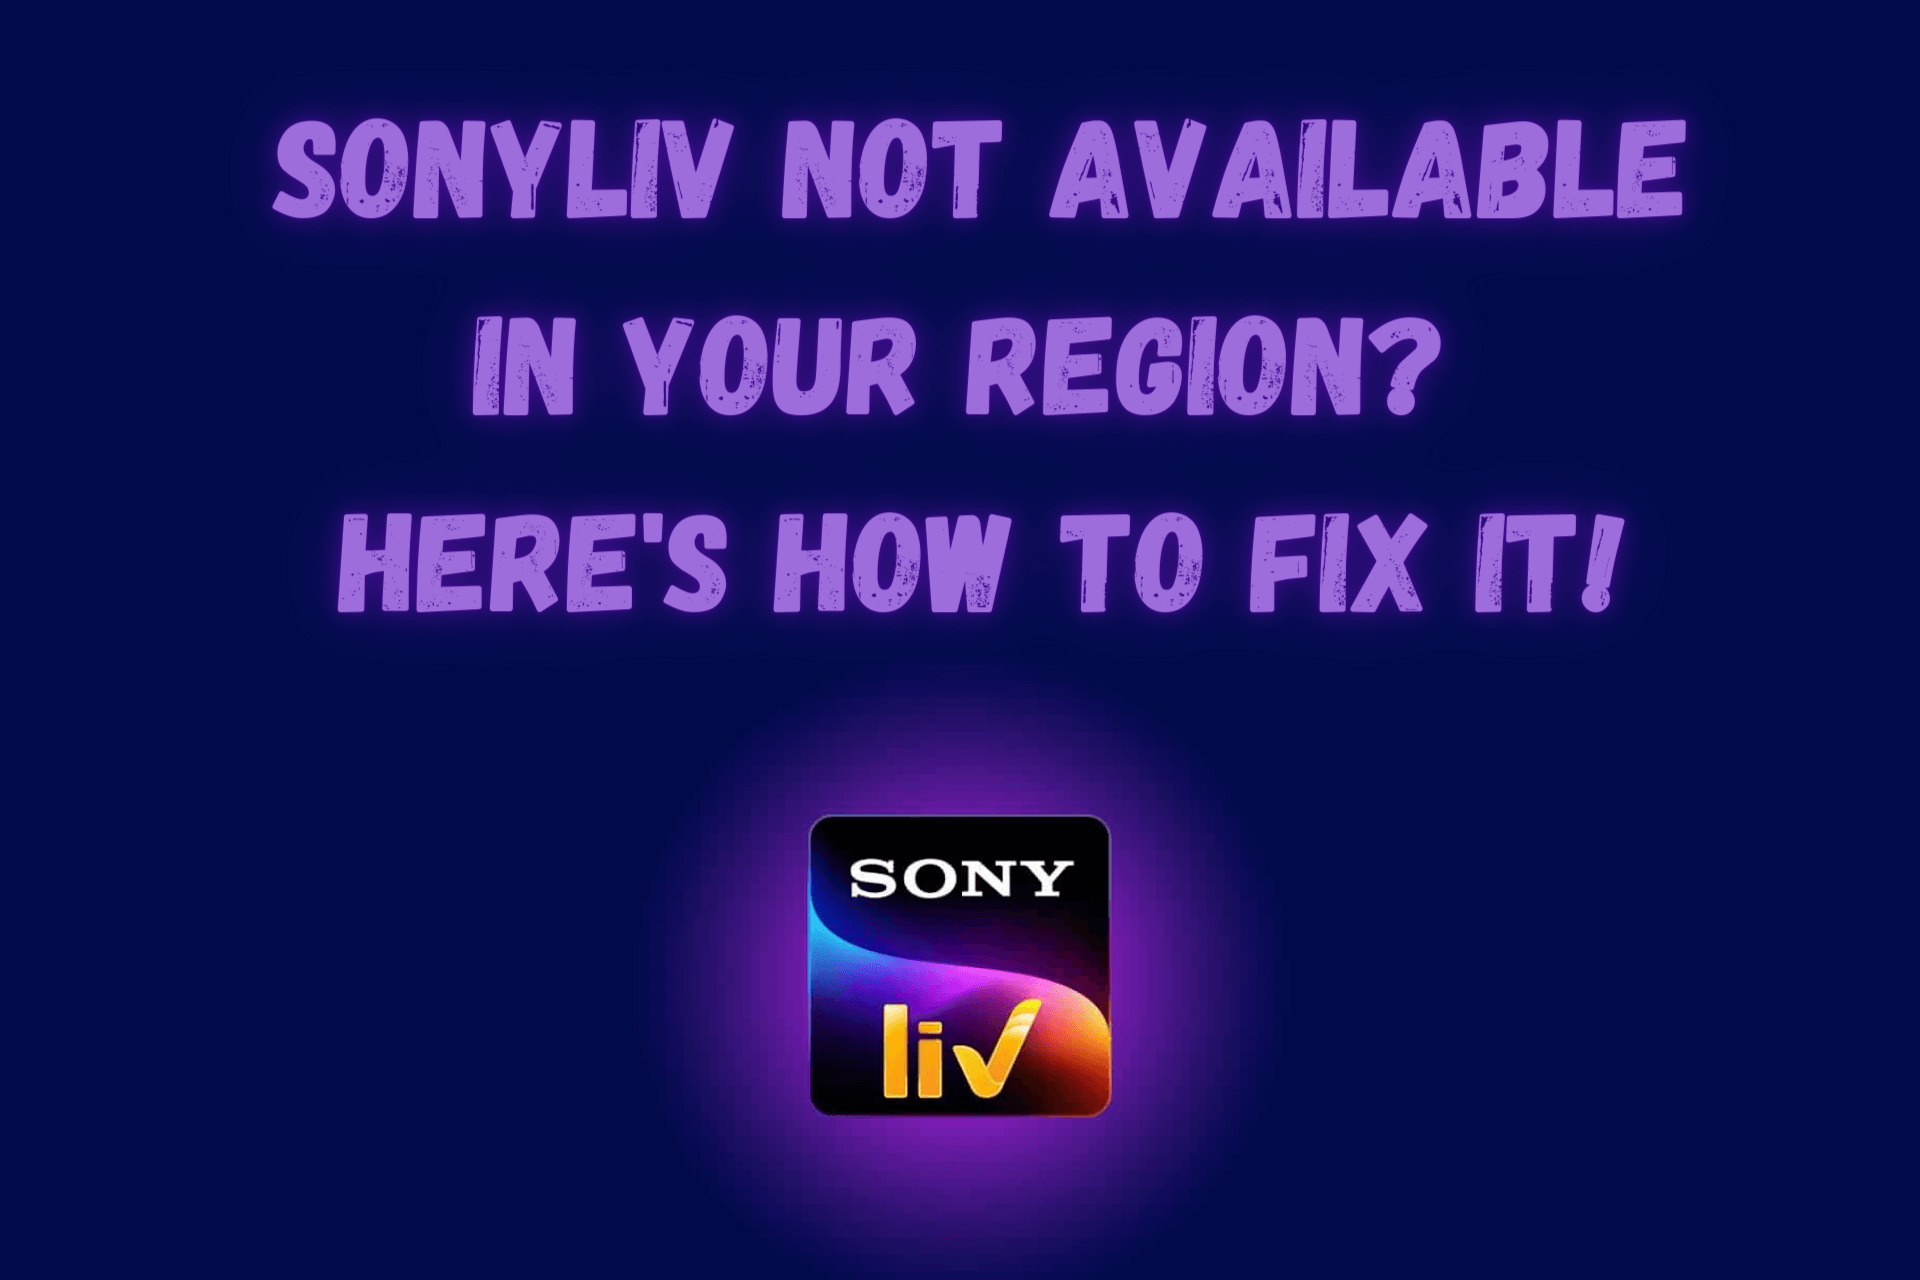 SonyLI not available in your region